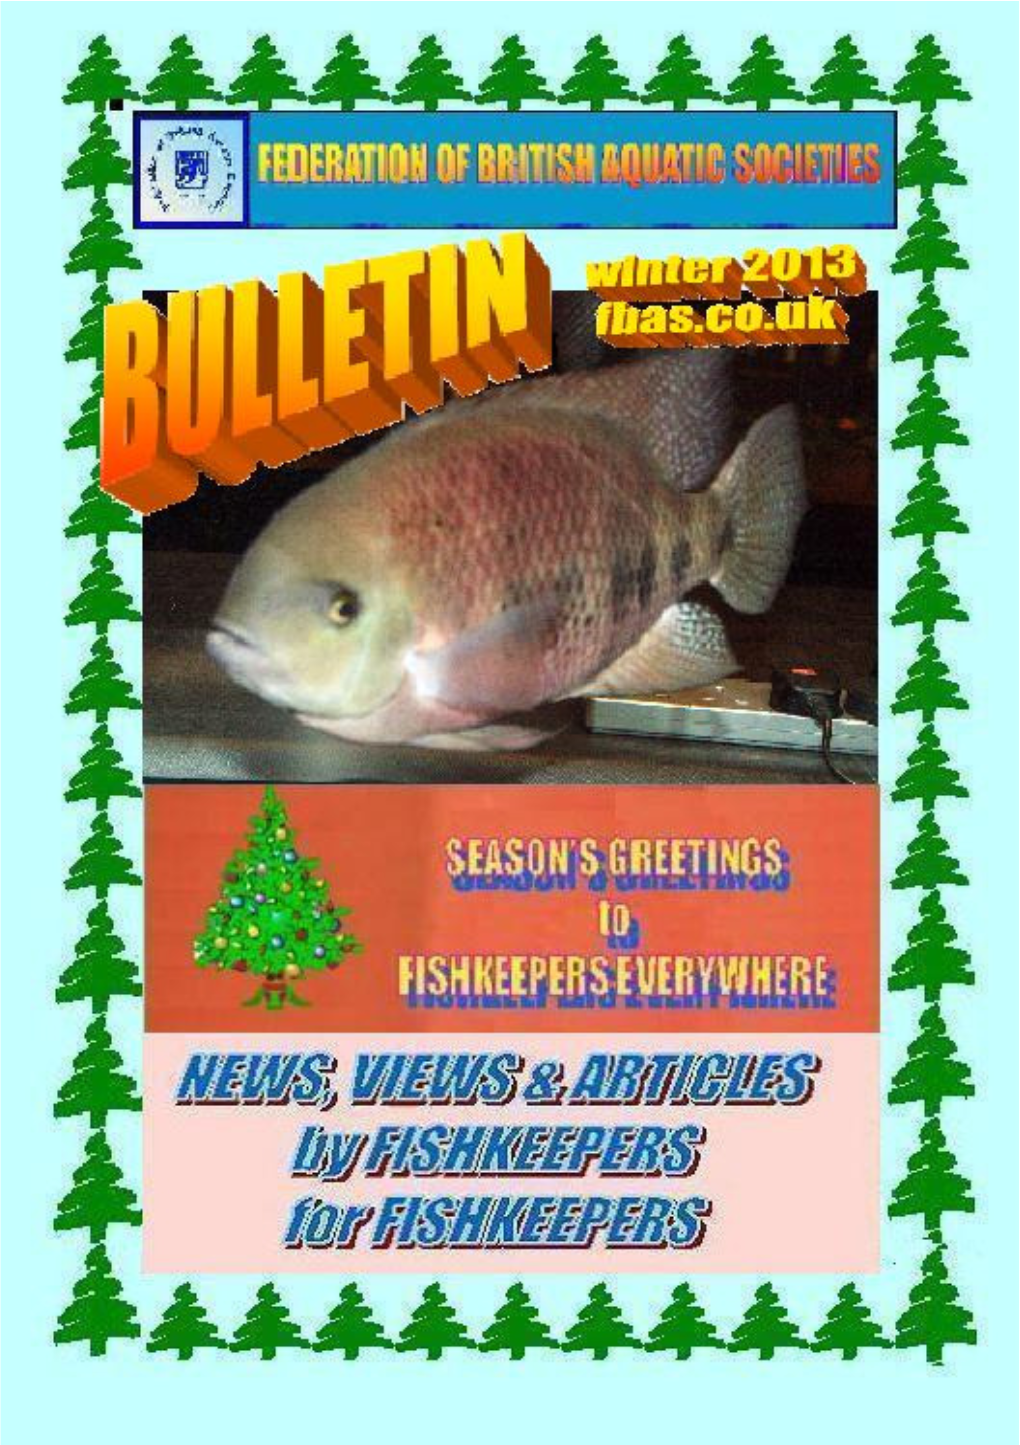 Xiphophorus Mayae 35 FESTIVAL of FISHKEEPING REPORT & RESULTS 36 SHOWS & EVENTS 51